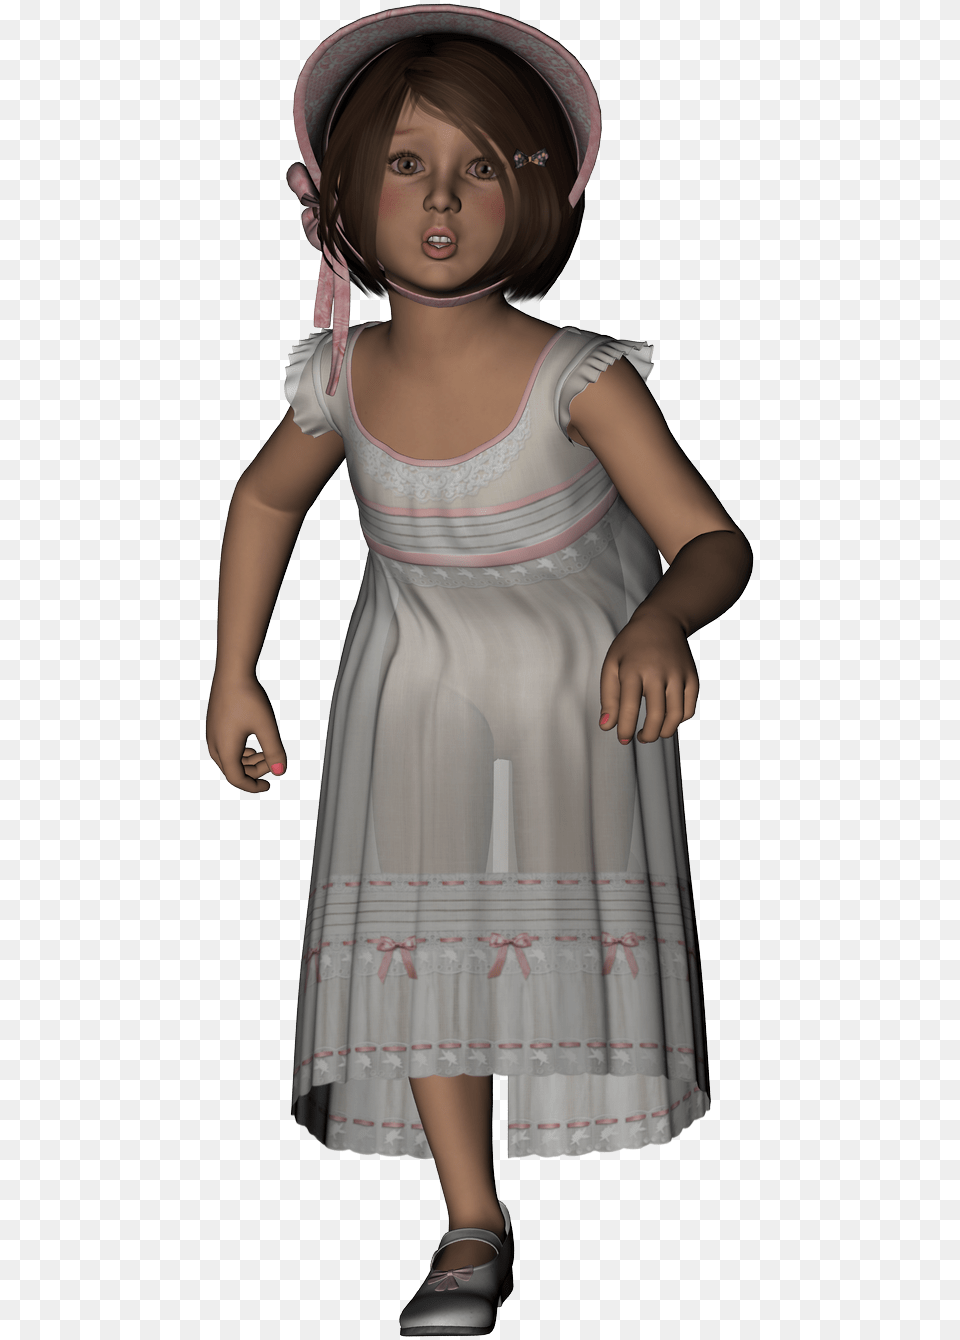 Kid Running Gown, Bonnet, Hat, Clothing, Dress Png